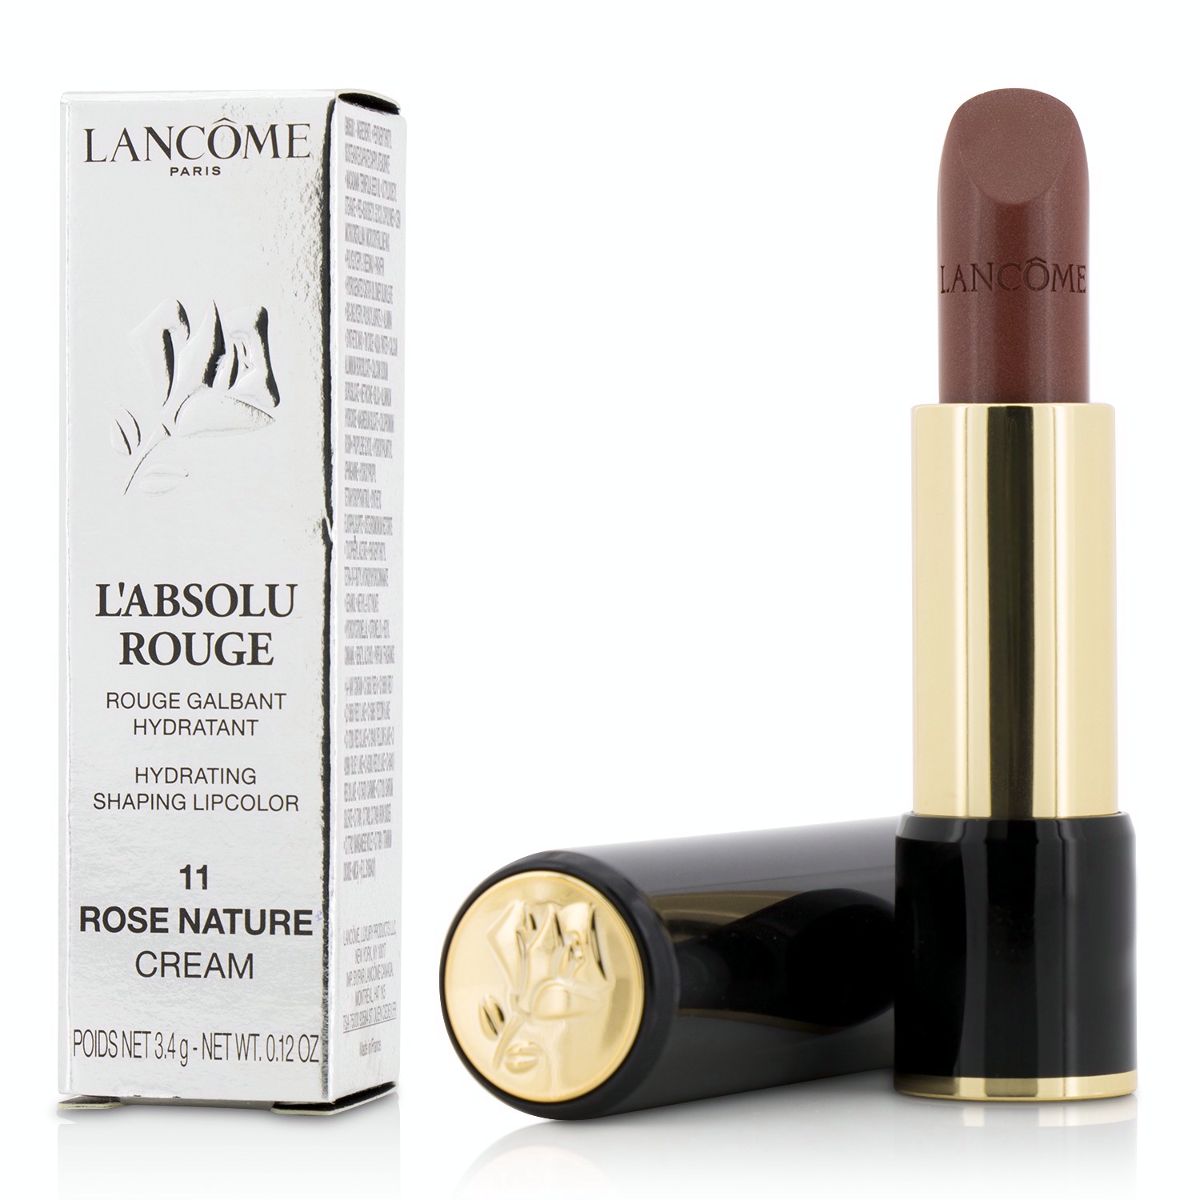 L Absolu Rouge Hydrating Shaping Lipcolor - # 11 Rose Nature (Cream) Lancome Image